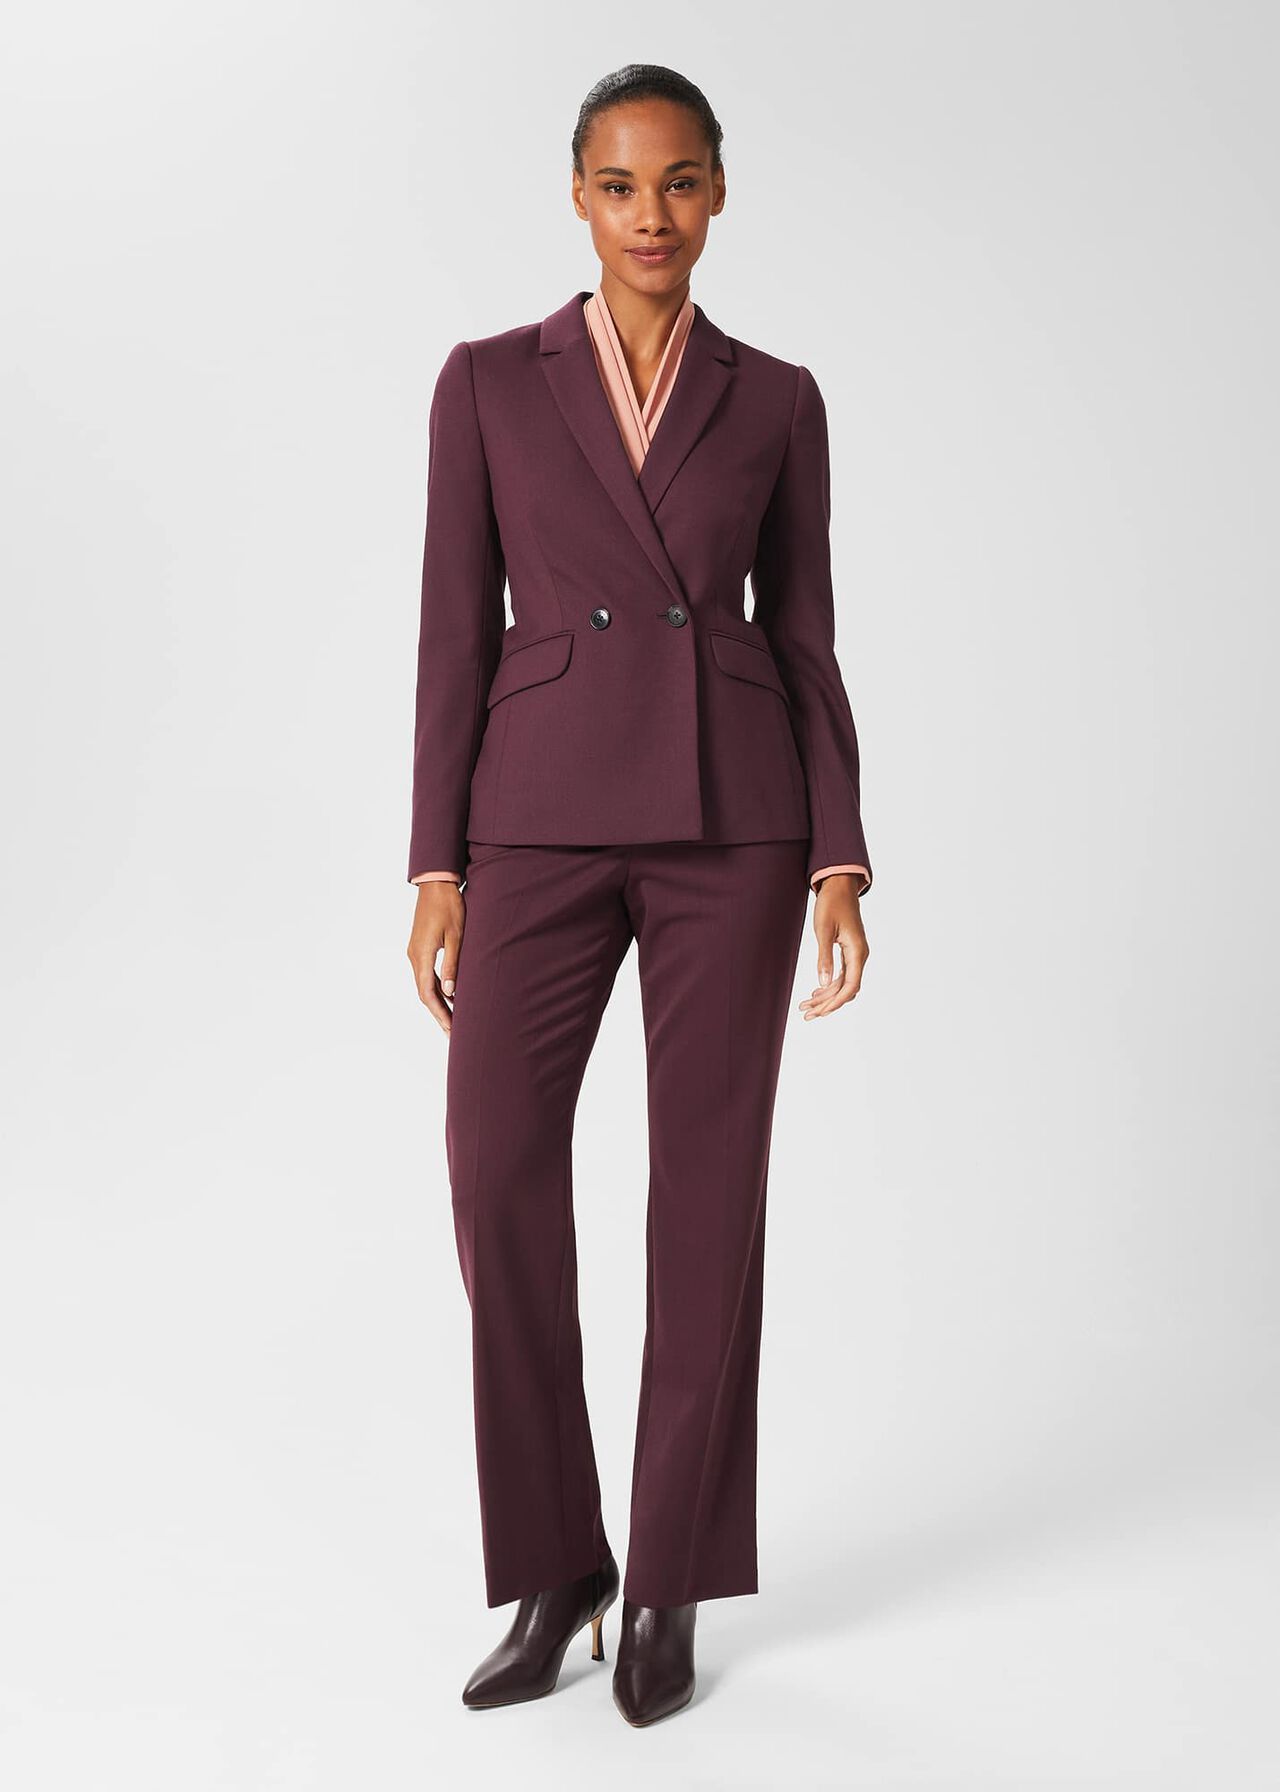 Womens Workwear  Suits for Women  Verycouk